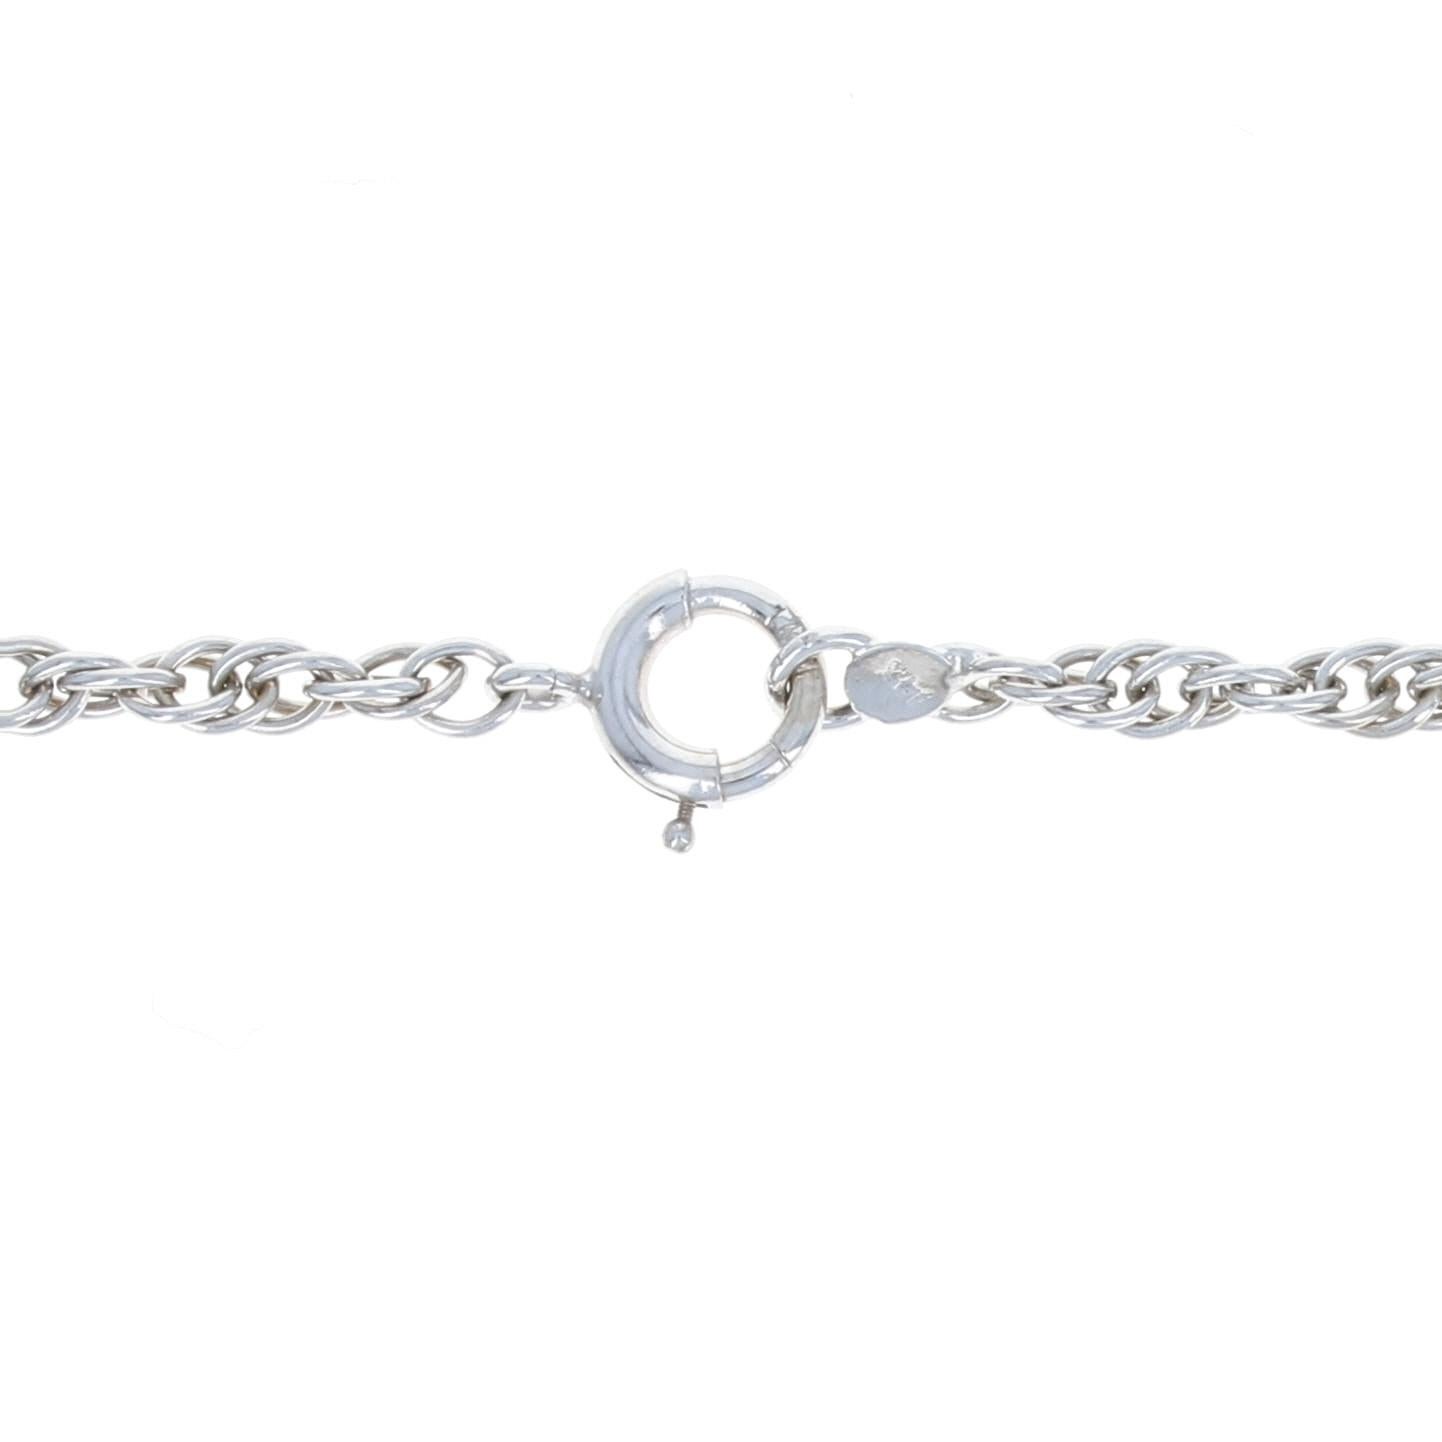 Women's White Gold Prince of Wales Chain Necklace, 14k Spring Ring Clasp